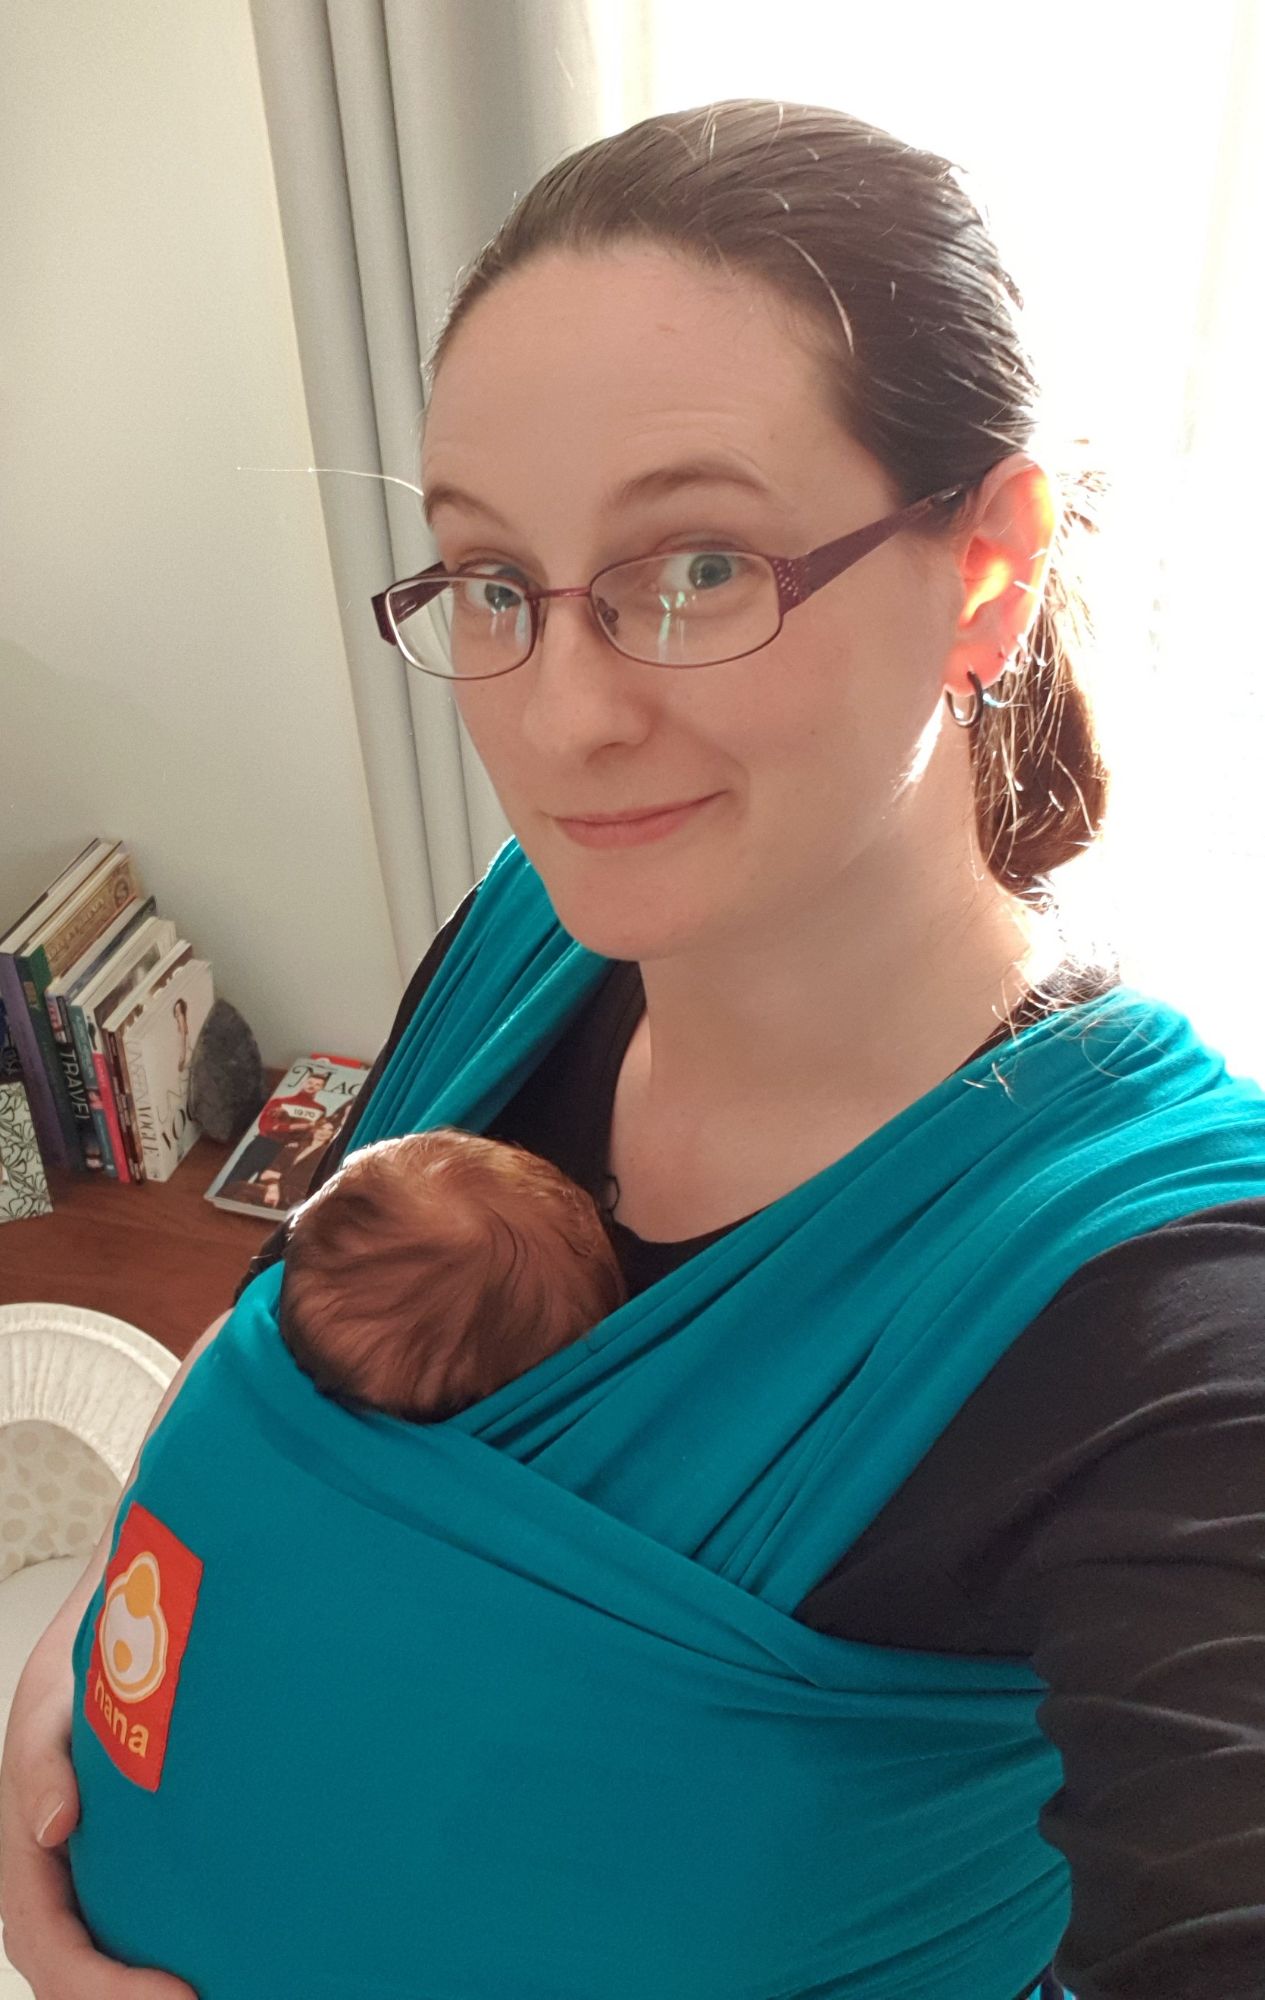 An image of Caz wearing a new baby in a stretchy wrap. Her hair is tied back in a bun and she is smiling at the camera.